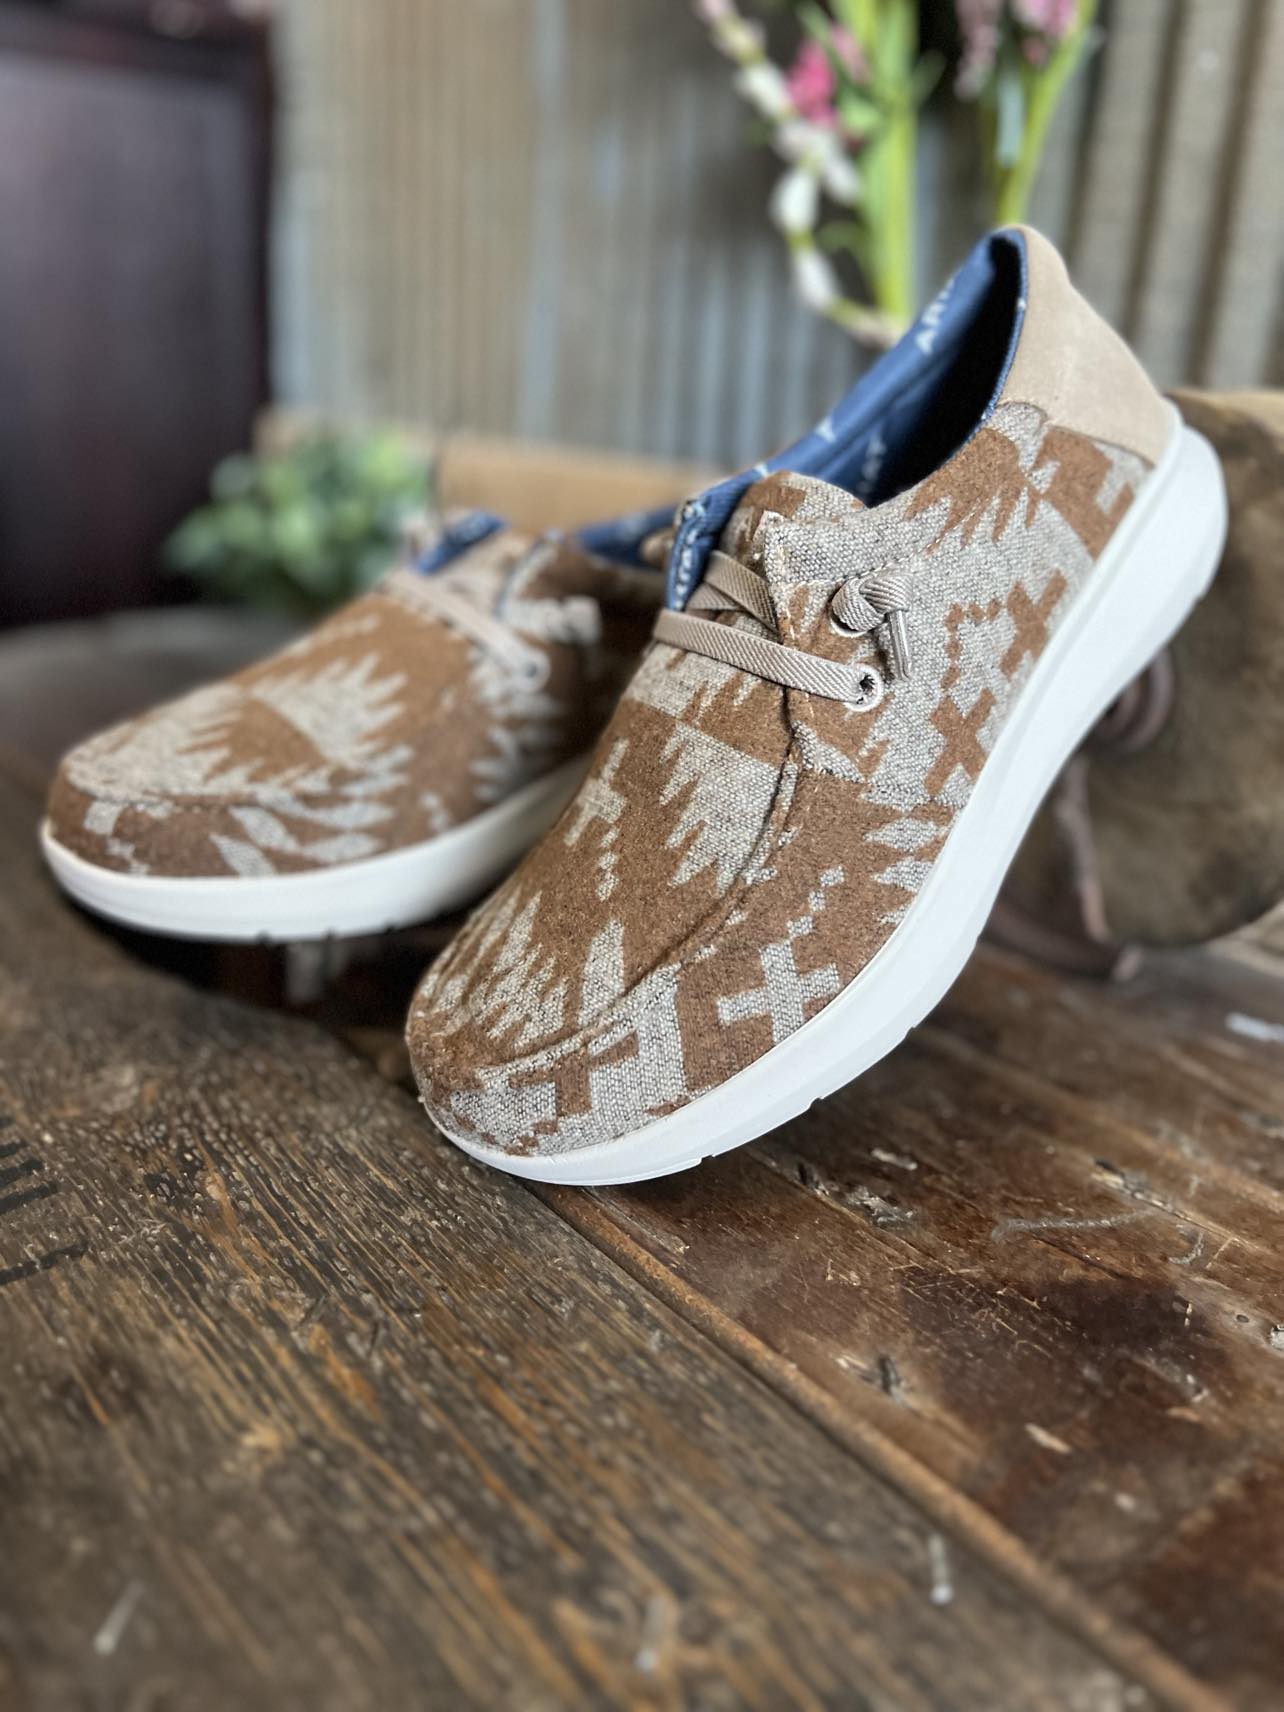 Men's Ariat Hilo Stretch Lace Sneakers in Wooly Tan Aztec-Men's Casual Shoes-Ariat-Lucky J Boots & More, Women's, Men's, & Kids Western Store Located in Carthage, MO